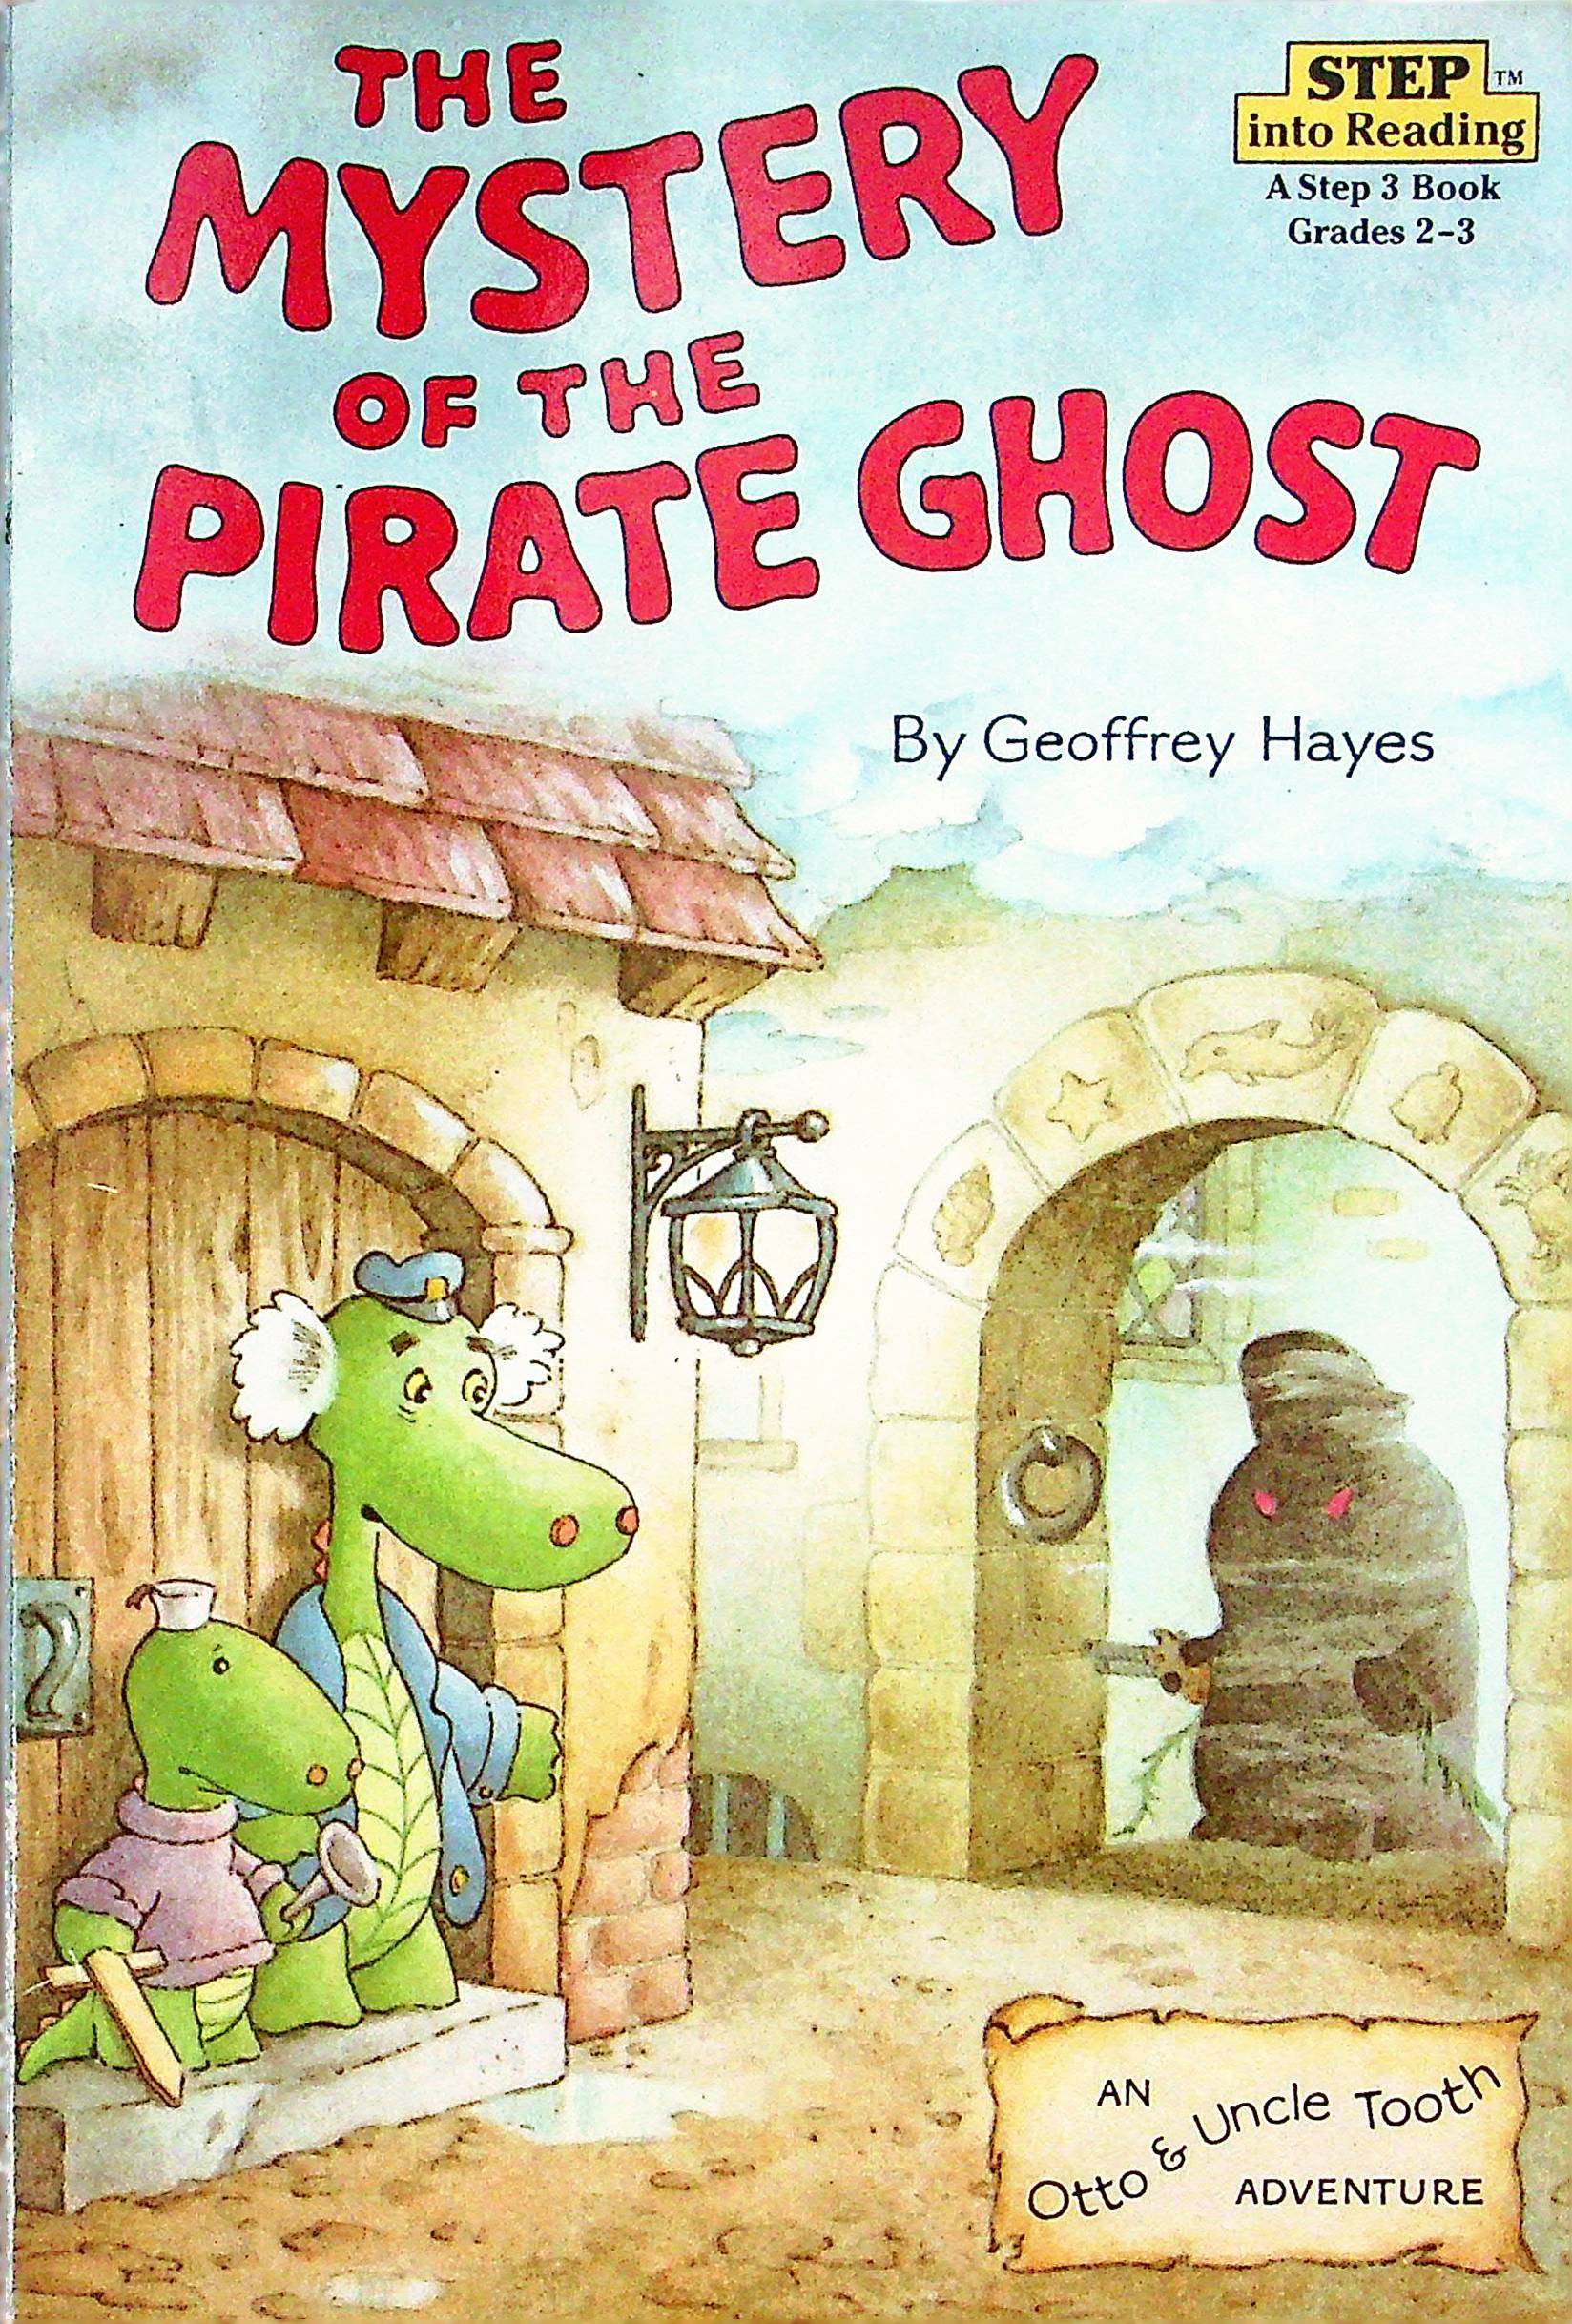 The Mystery of the Pirate Ghost by Geoffrey Hayes